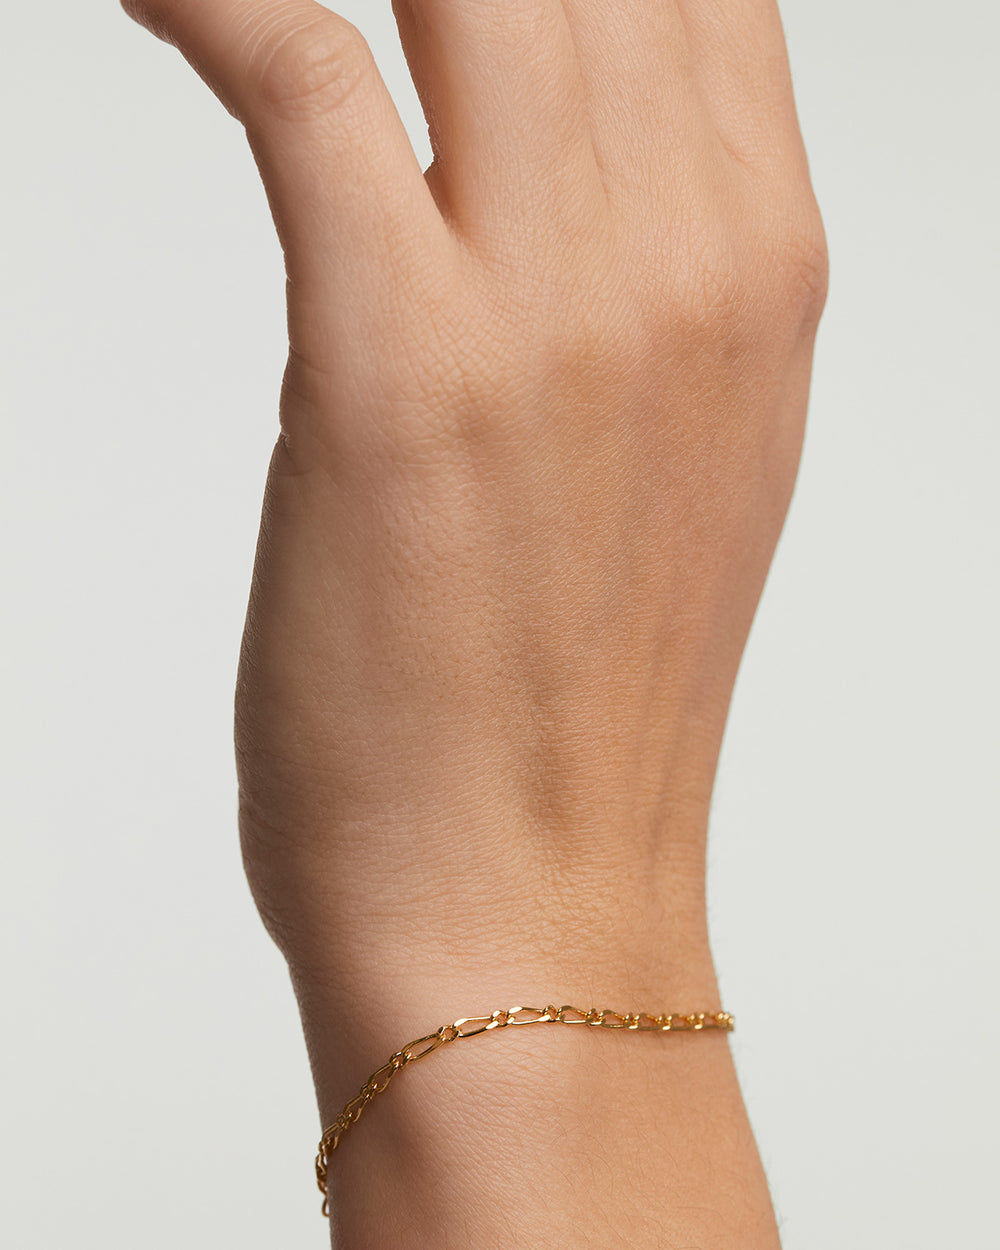 Gold-plated sleek chain bracelet with intertwined asymmetric links 